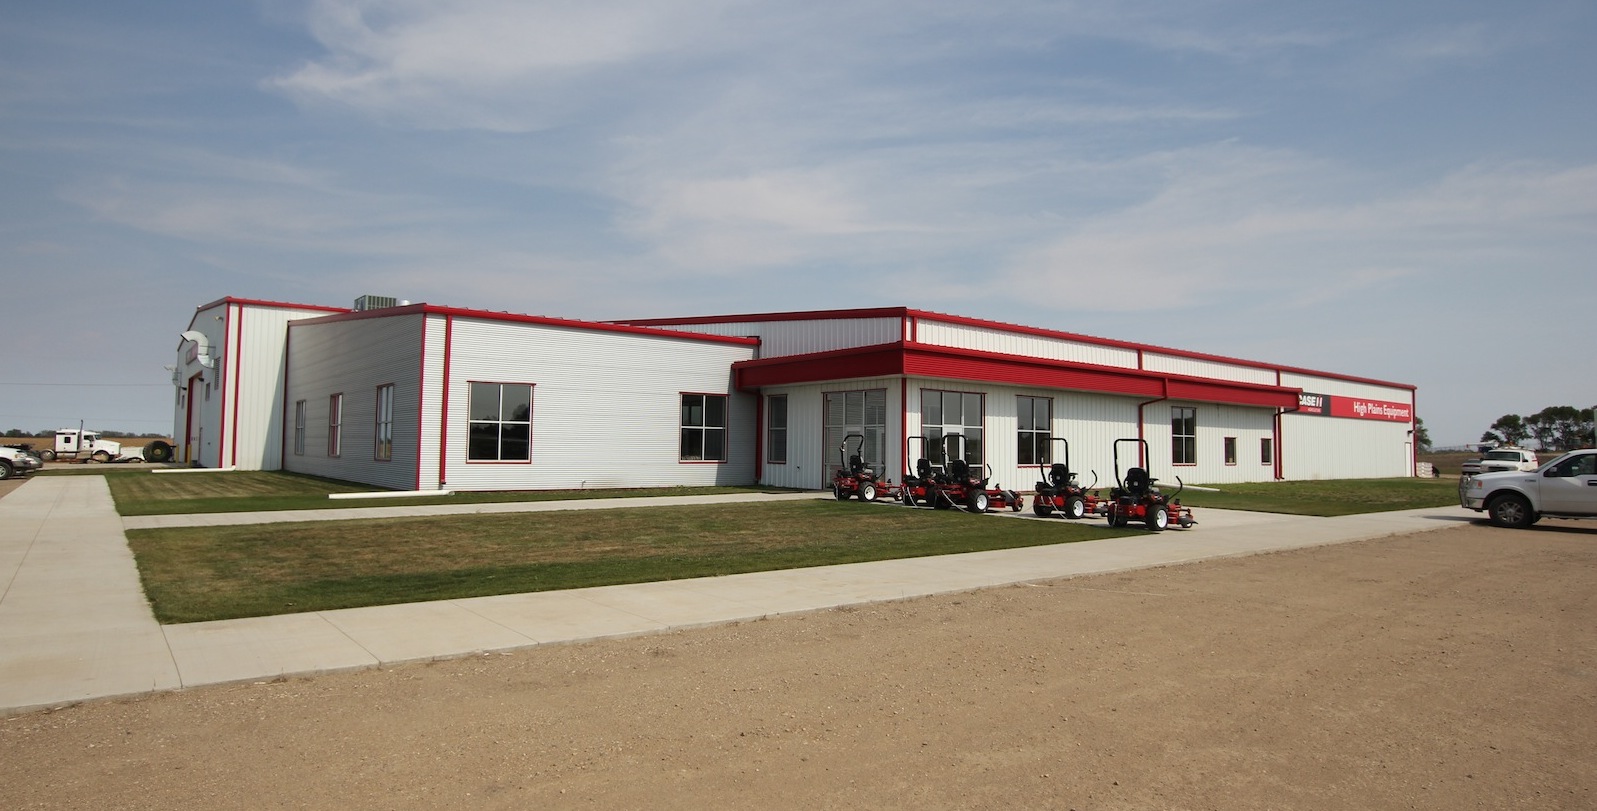 High Plains Equipment sells and services Case IH agricultural equipment at its n